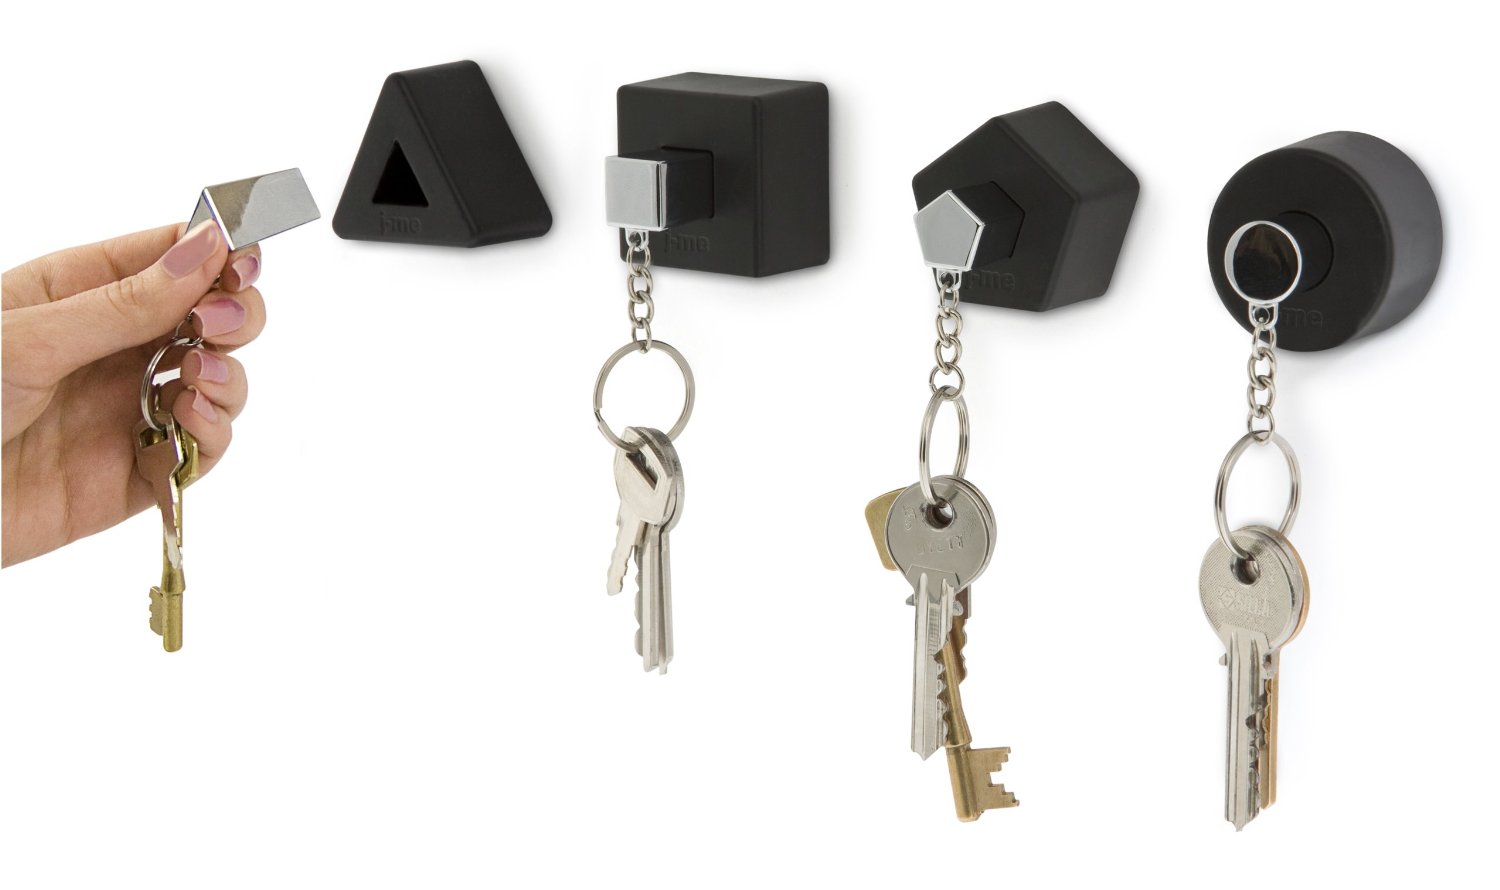 Key Holder Shapes with one shape out